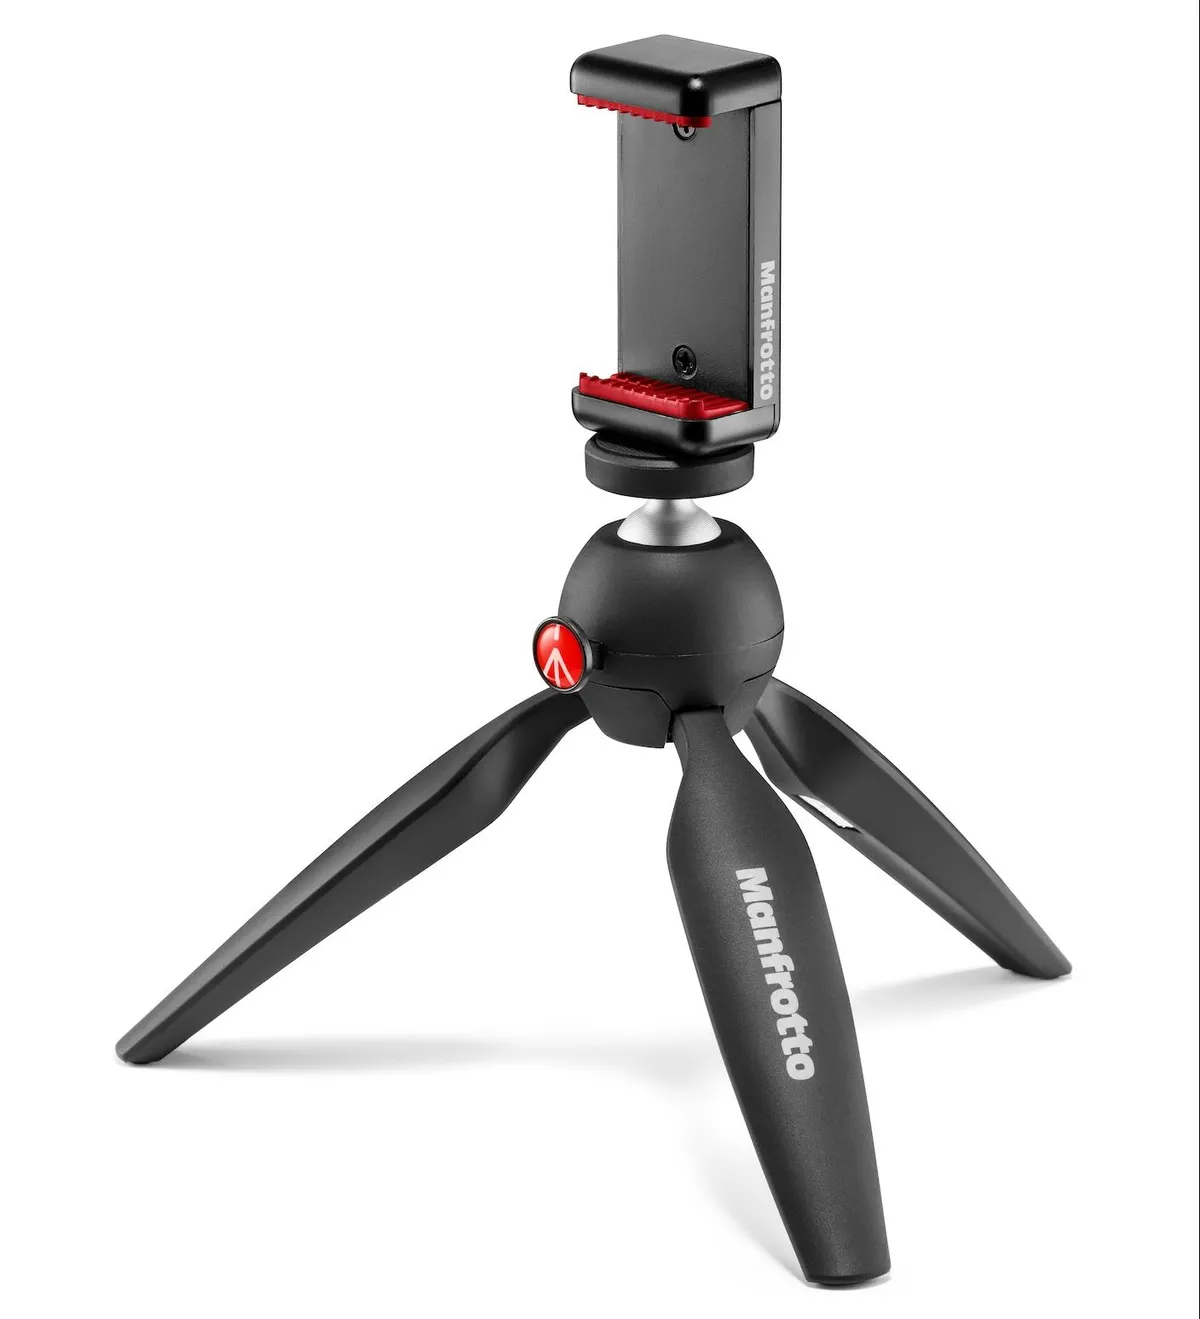 Manfrotto PIXI with Universal Smartphone Clamp